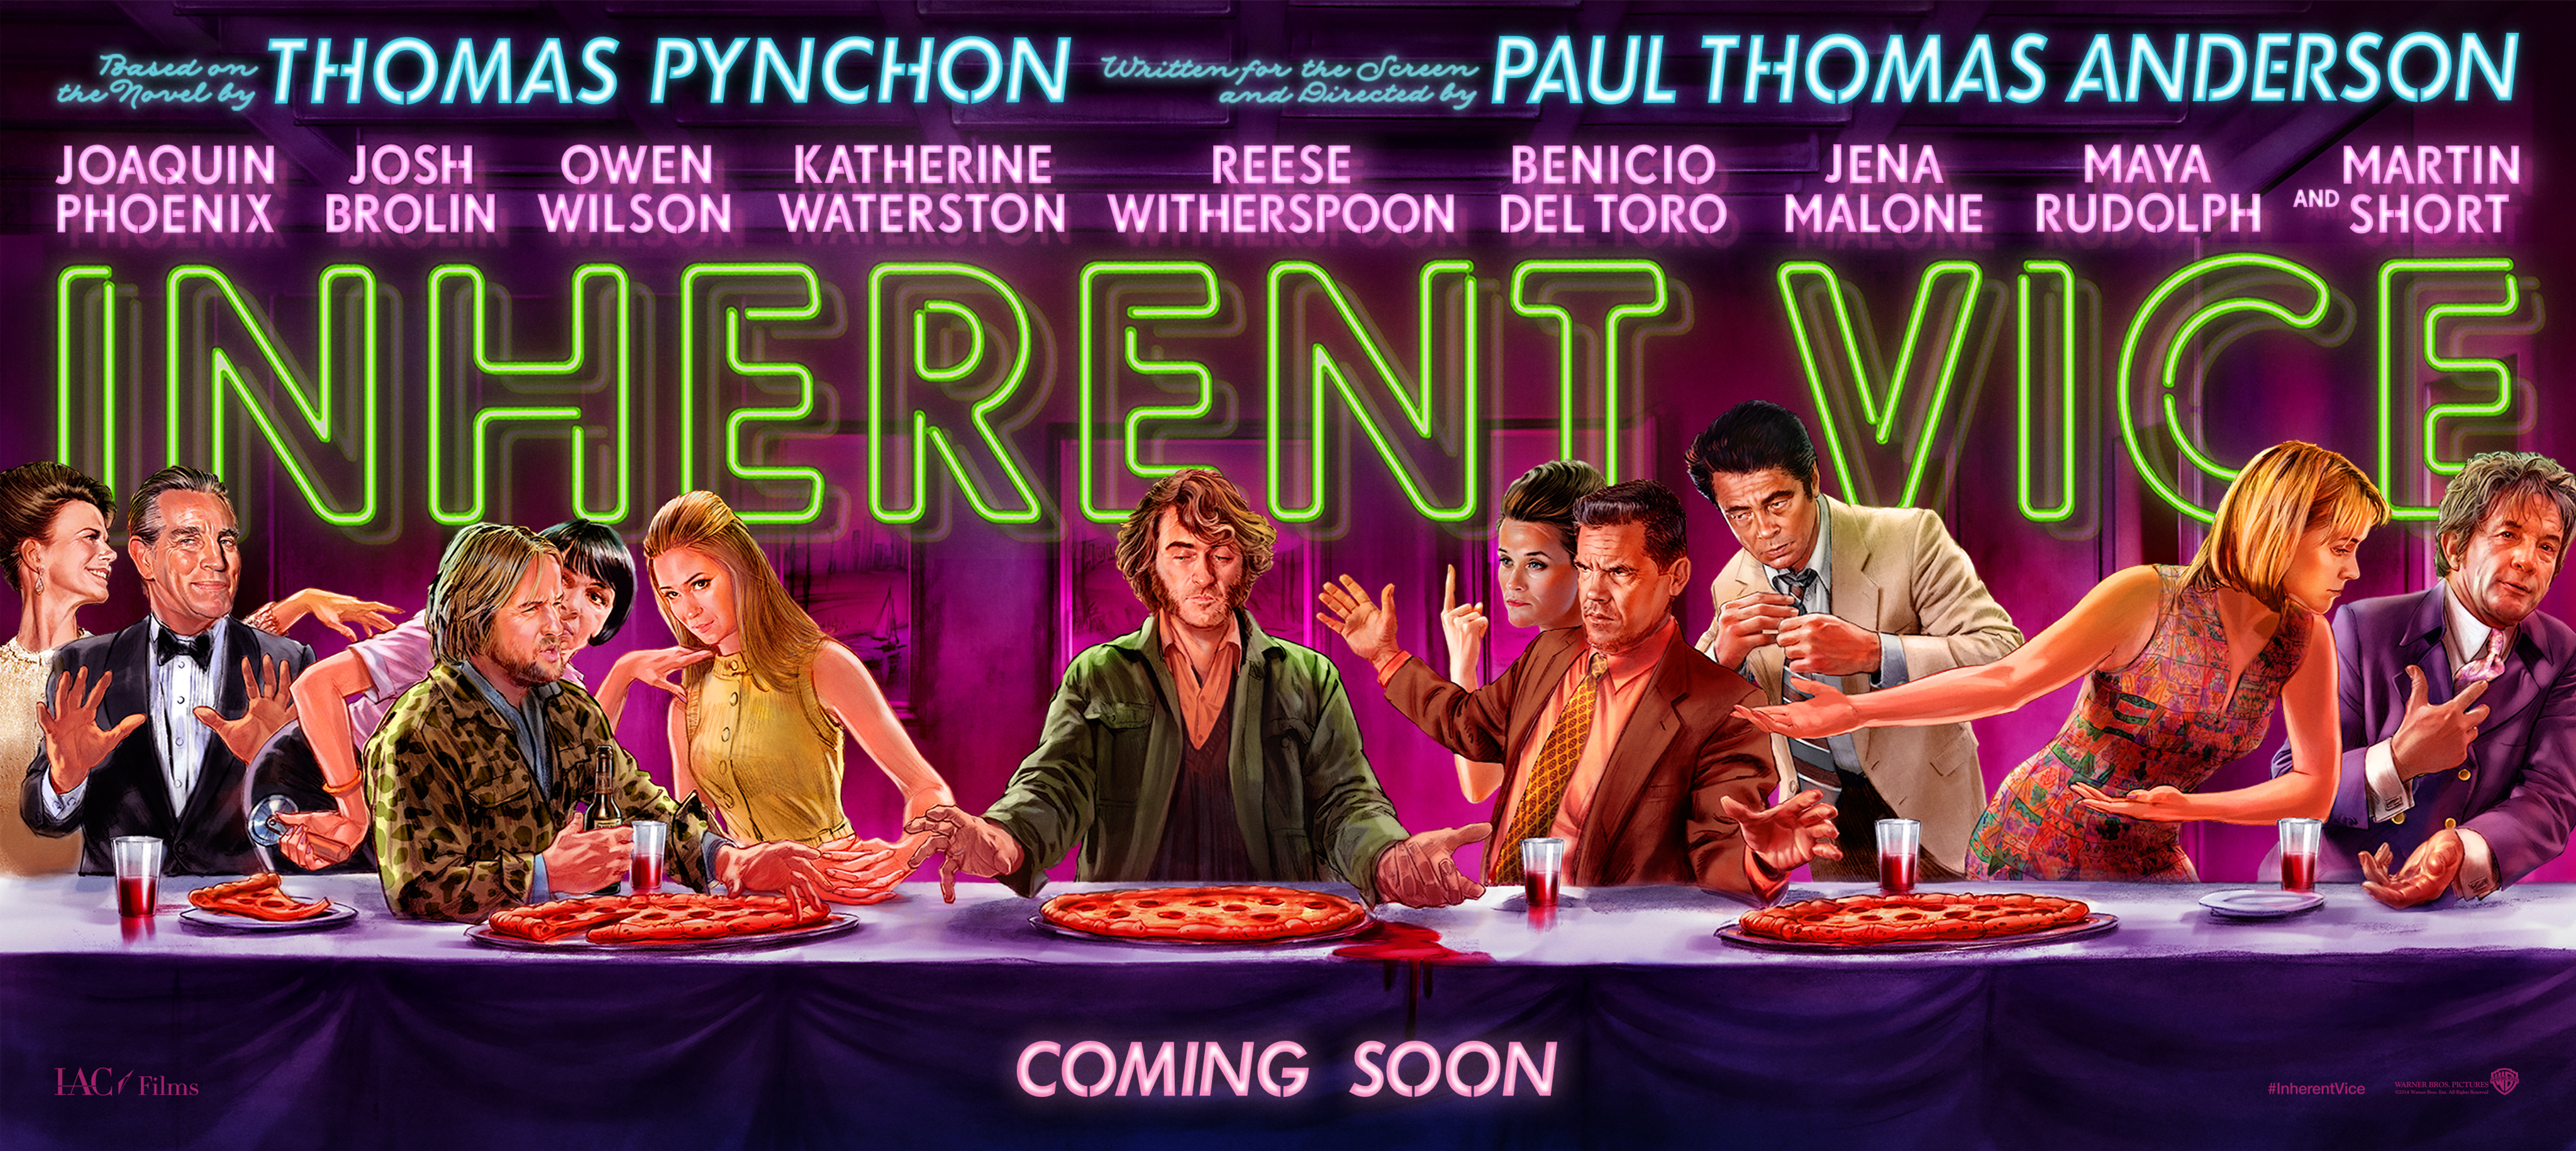 Inherent Vice Movie Poster (2014) .  Image courtesy of http://imgs.littlewhitelies.co.uk/